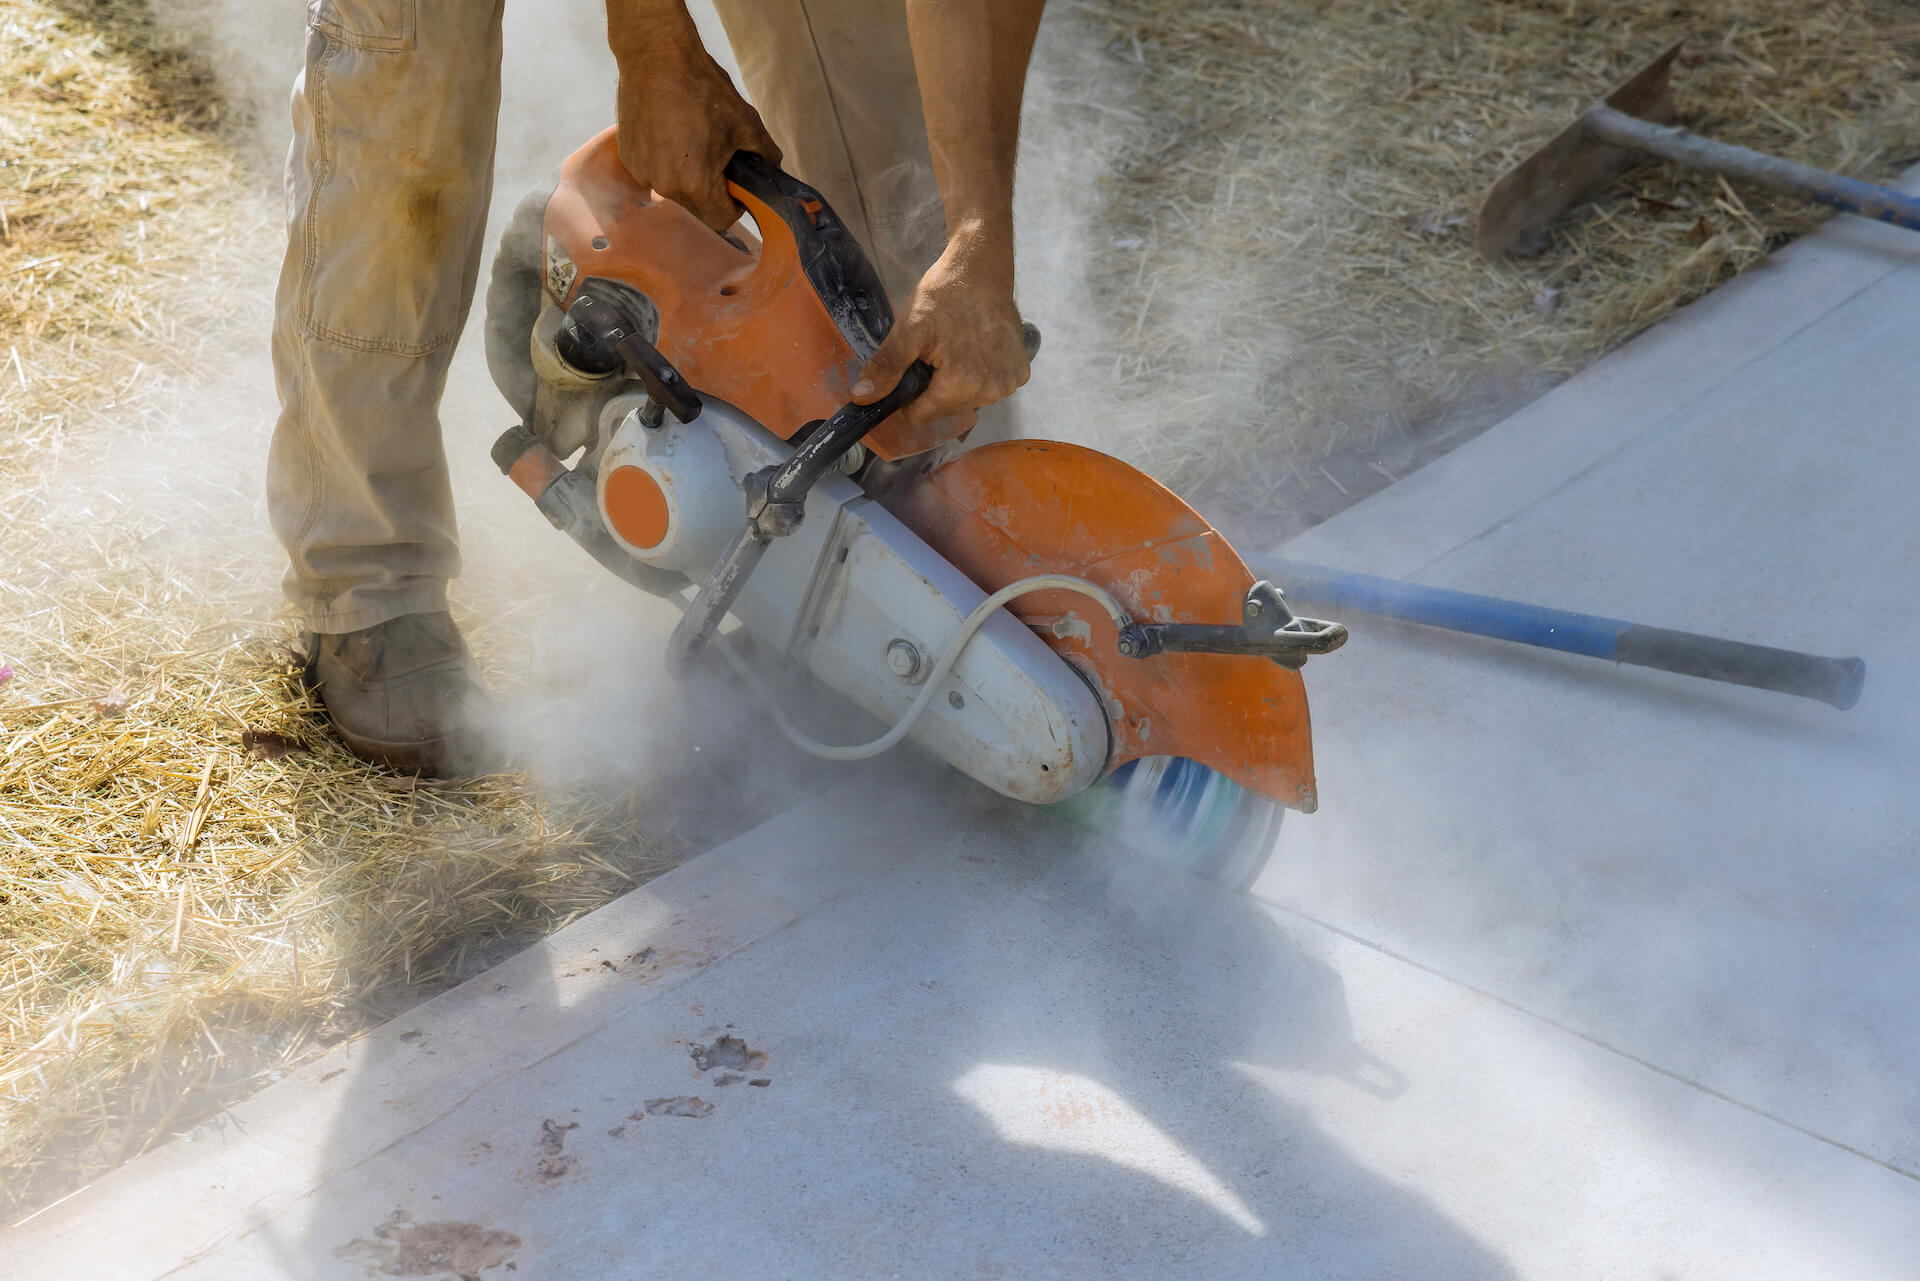 Concrete being cut with a saw | Featured Image for the Silica Dust Management Blog by Bramwell Partners.